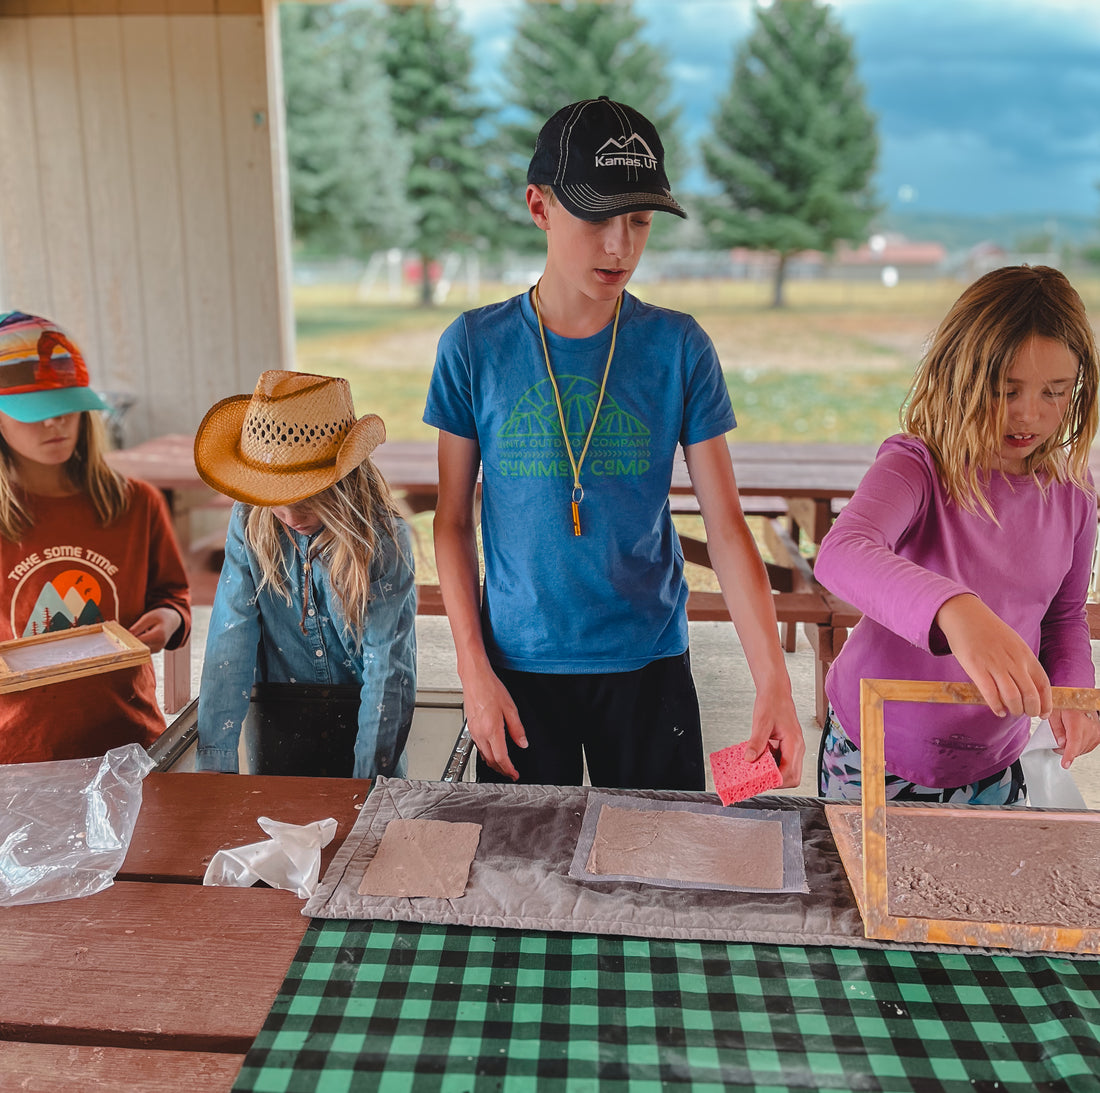 Campers making recycled paper at a park.